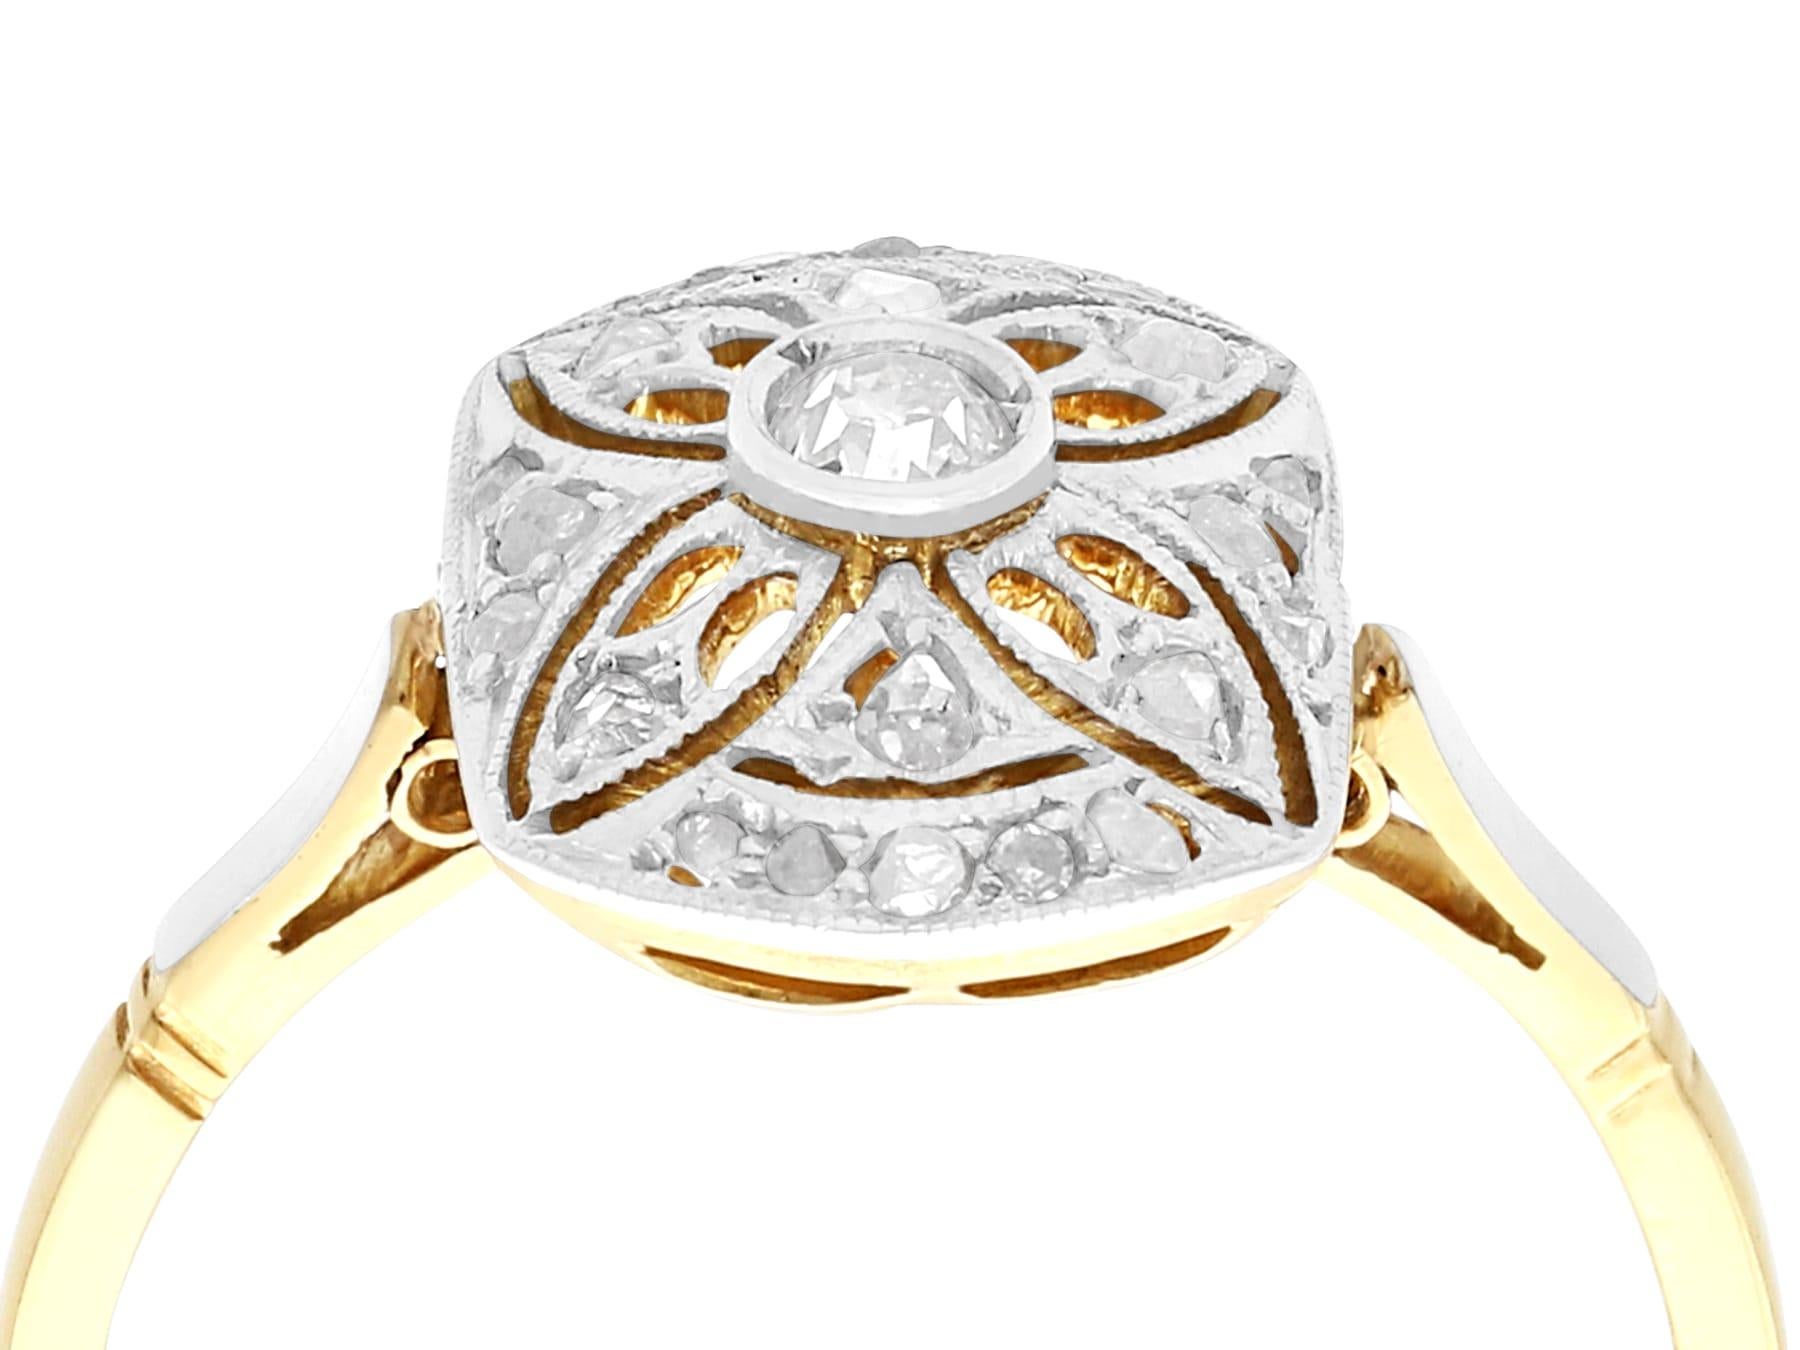 An impressive antique 1930's Art Deco 0.25 carat diamond and 18 karat yellow gold, platinum set dress ring; part of our diverse antique estate jewelry collections.

This fine and impressive Art Deco diamond ring has been crafted in 18k yellow gold